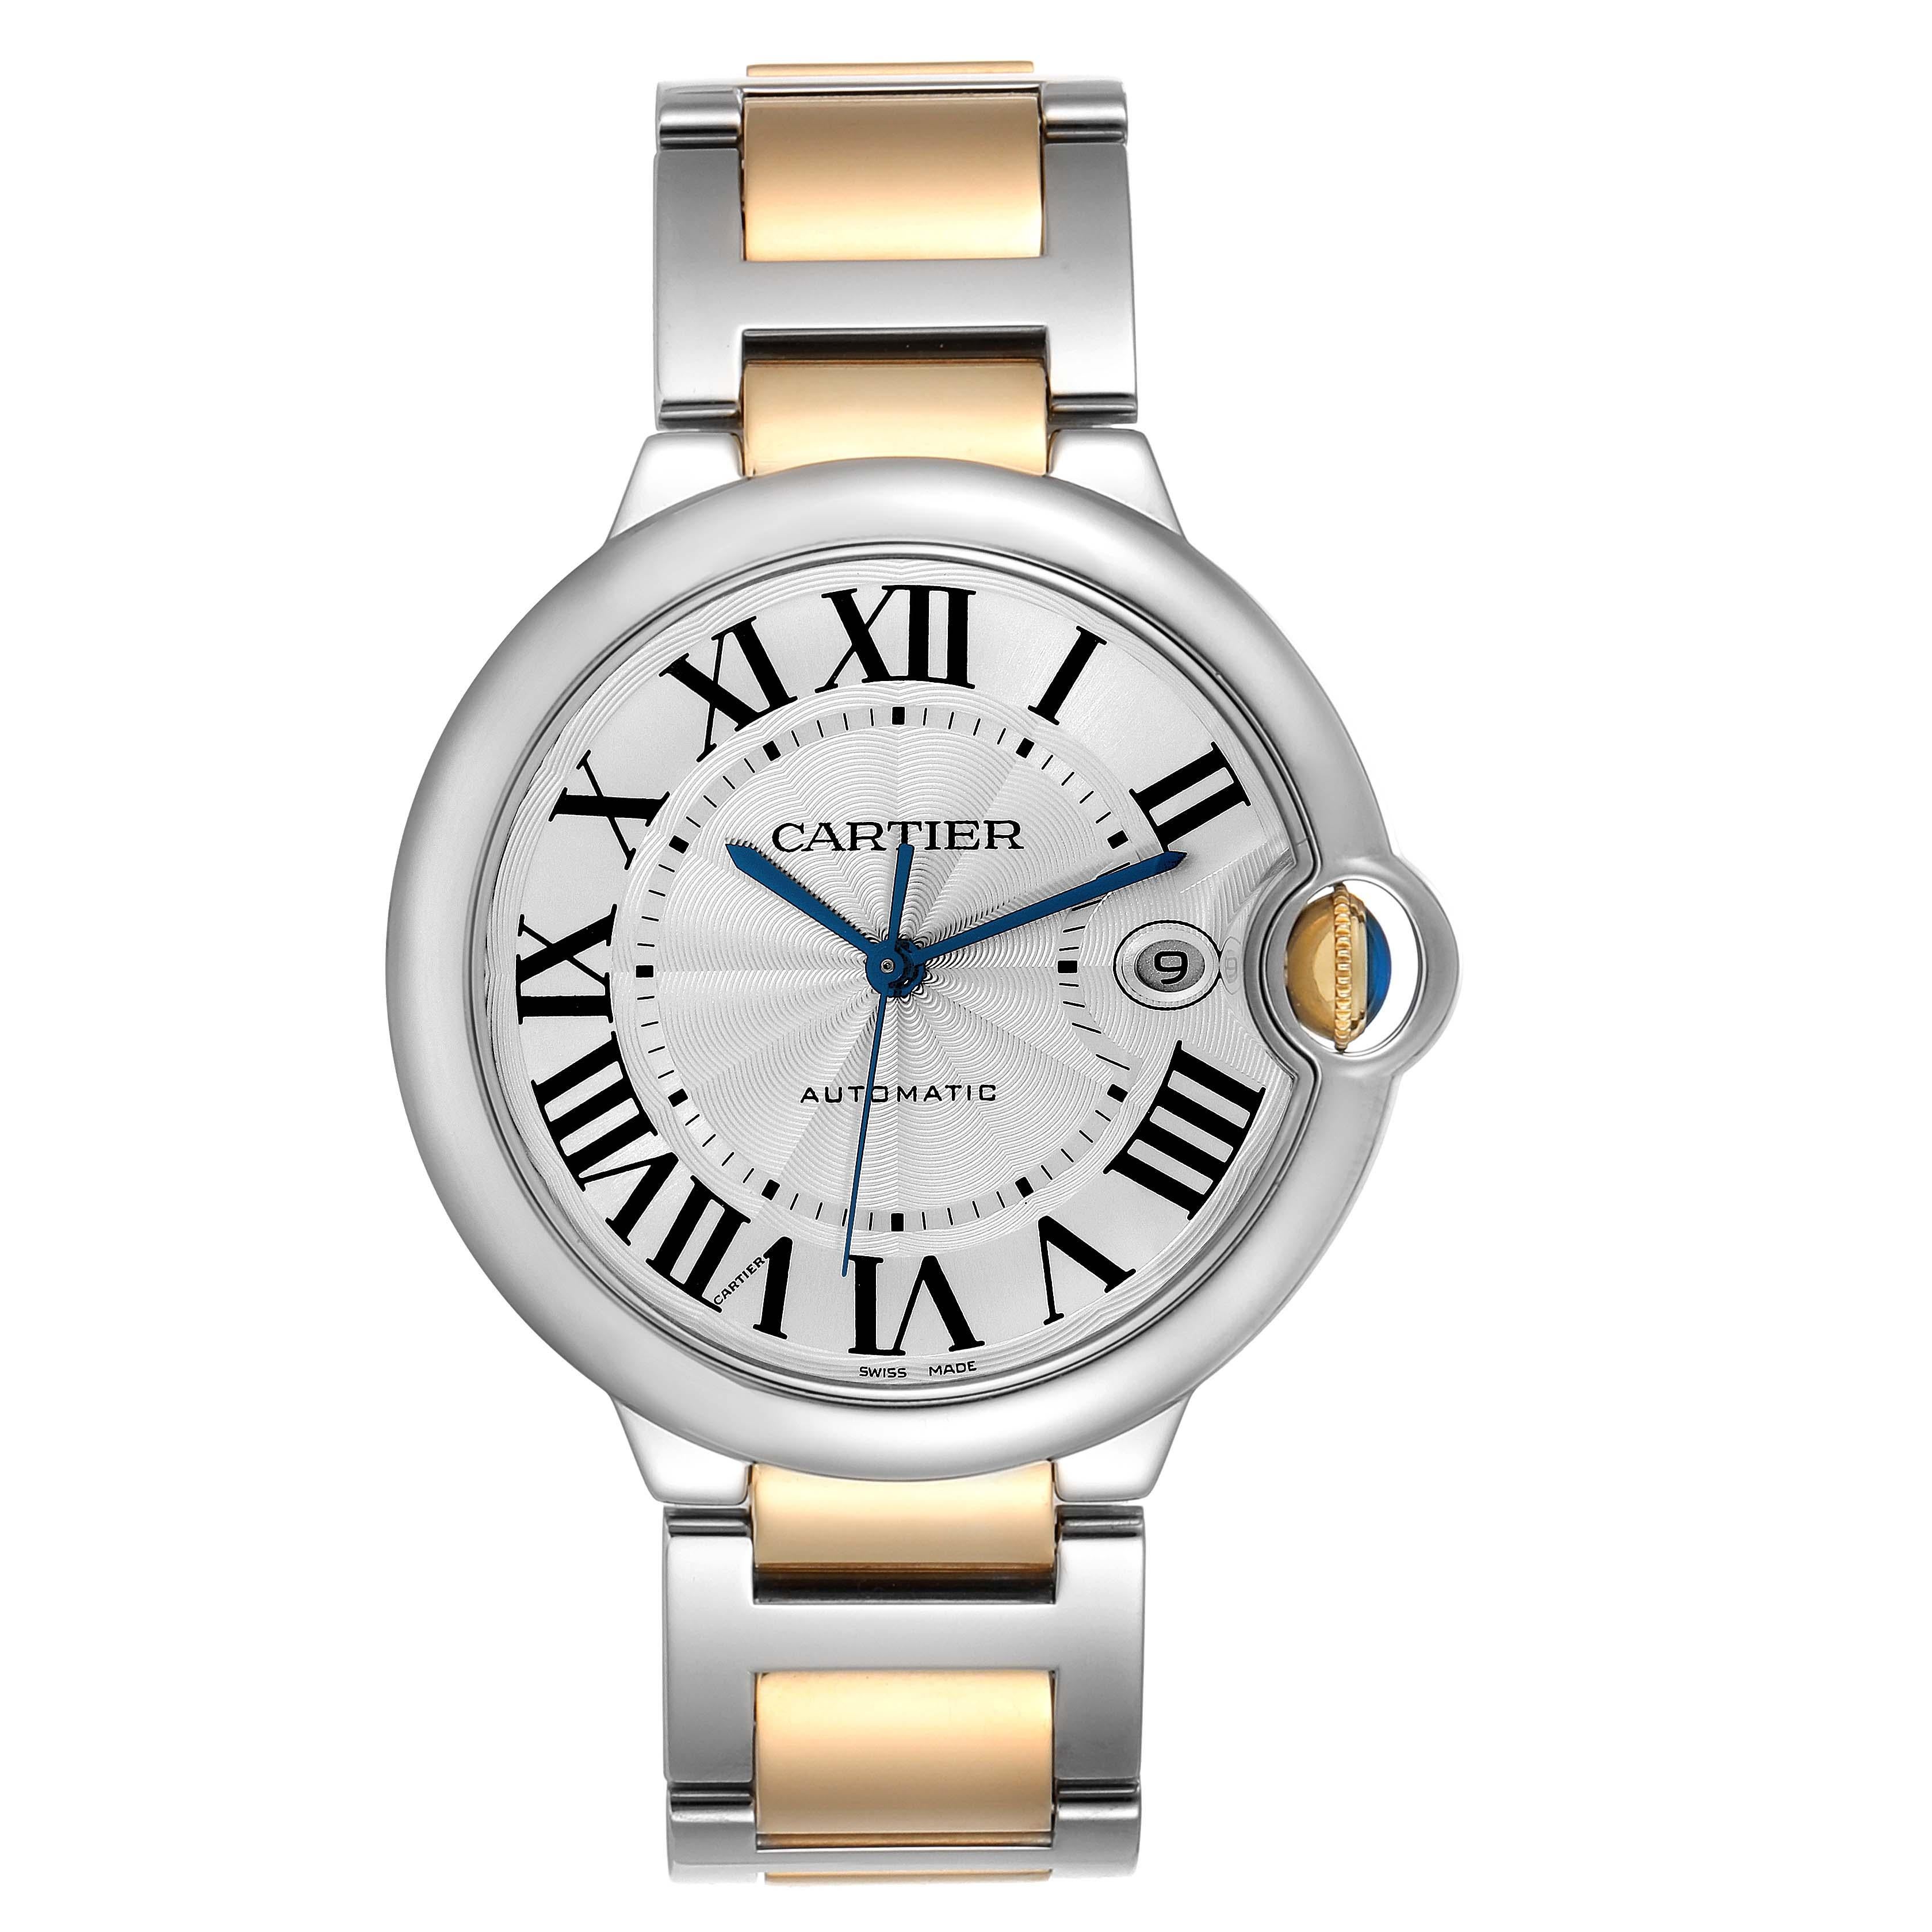 Cartier Ballon Bleu Silver Dial Steel Yellow Gold Mens Watch W69009Z3. Automatic self-winding movement. Caliber 049. Round stainless steel case 42.1 mm in diameter, 13 mm thick. Fluted 18k yellow gold crown set with the blue spinel cabochon.